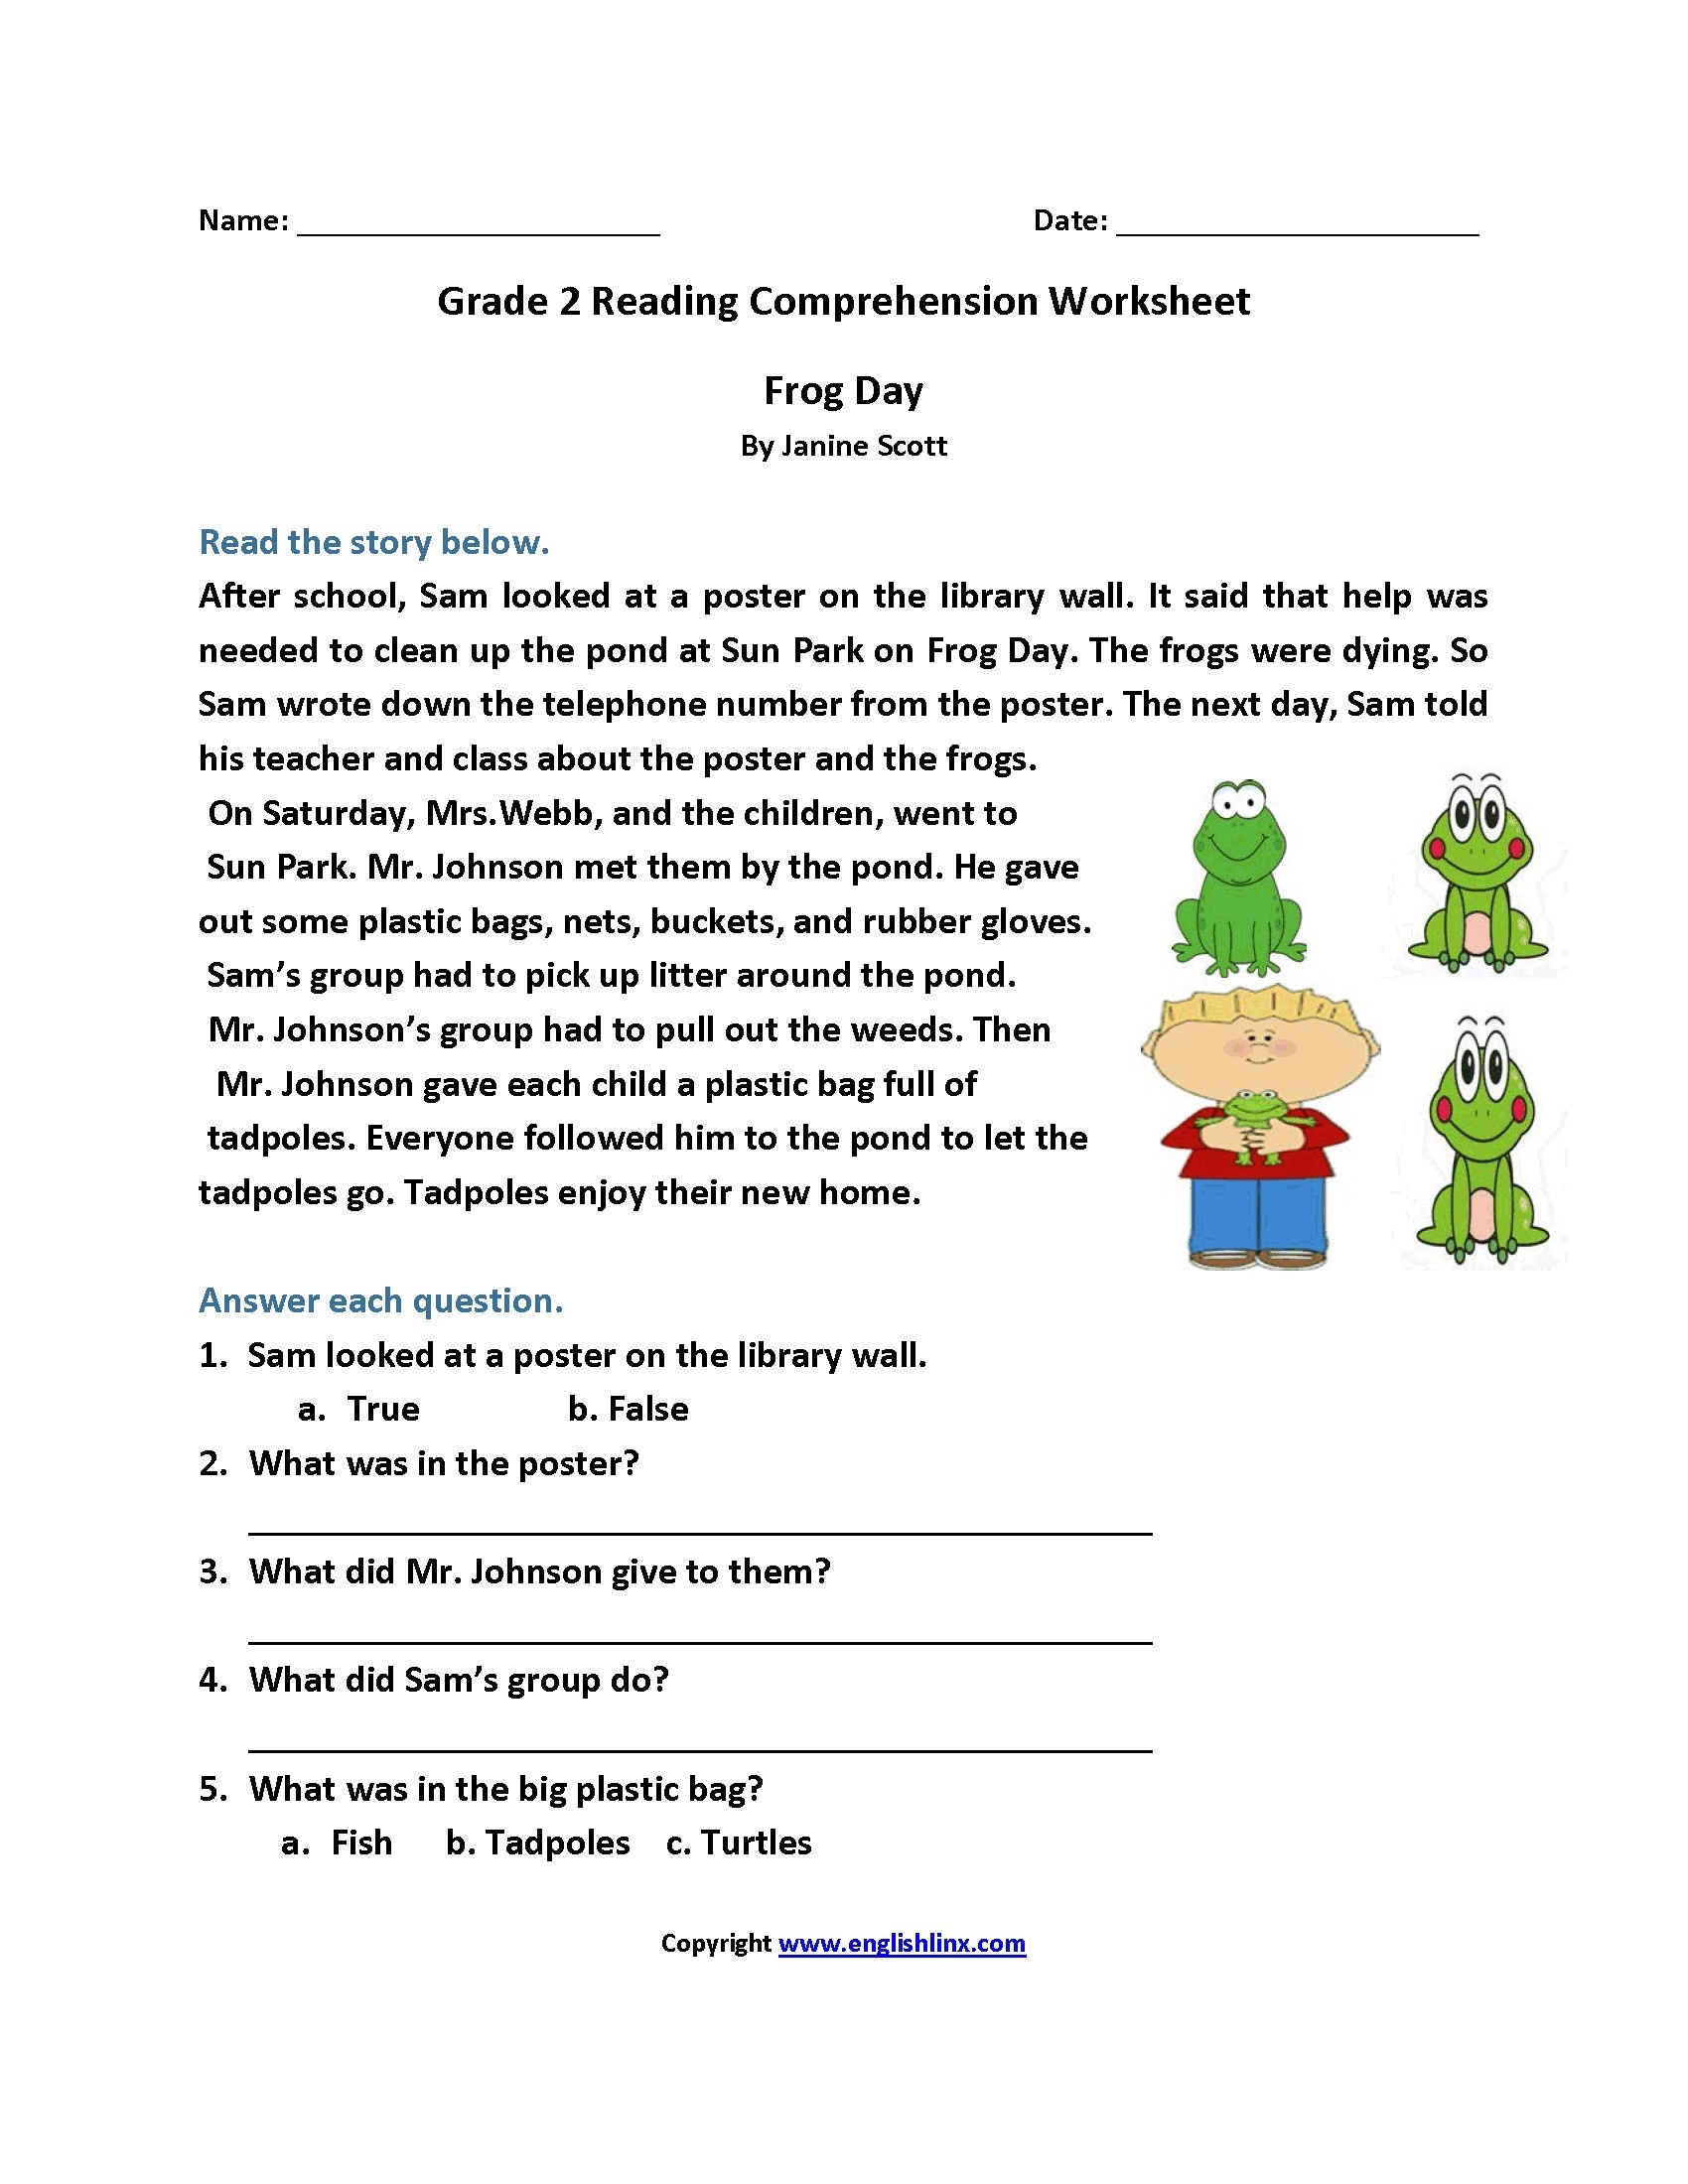 Worksheet : Free Printable Short Stories With Comprehension - Free Printable Short Stories With Comprehension Questions